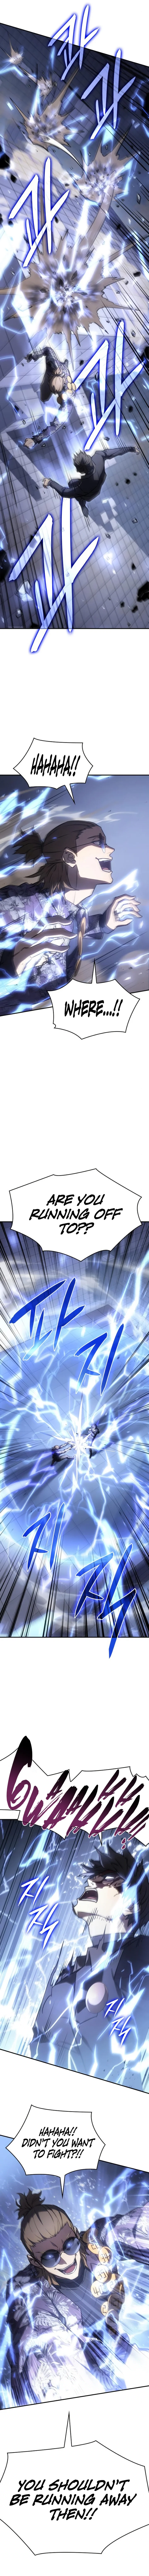 Regressing with the King’s Power - Chapter 16 Page 5